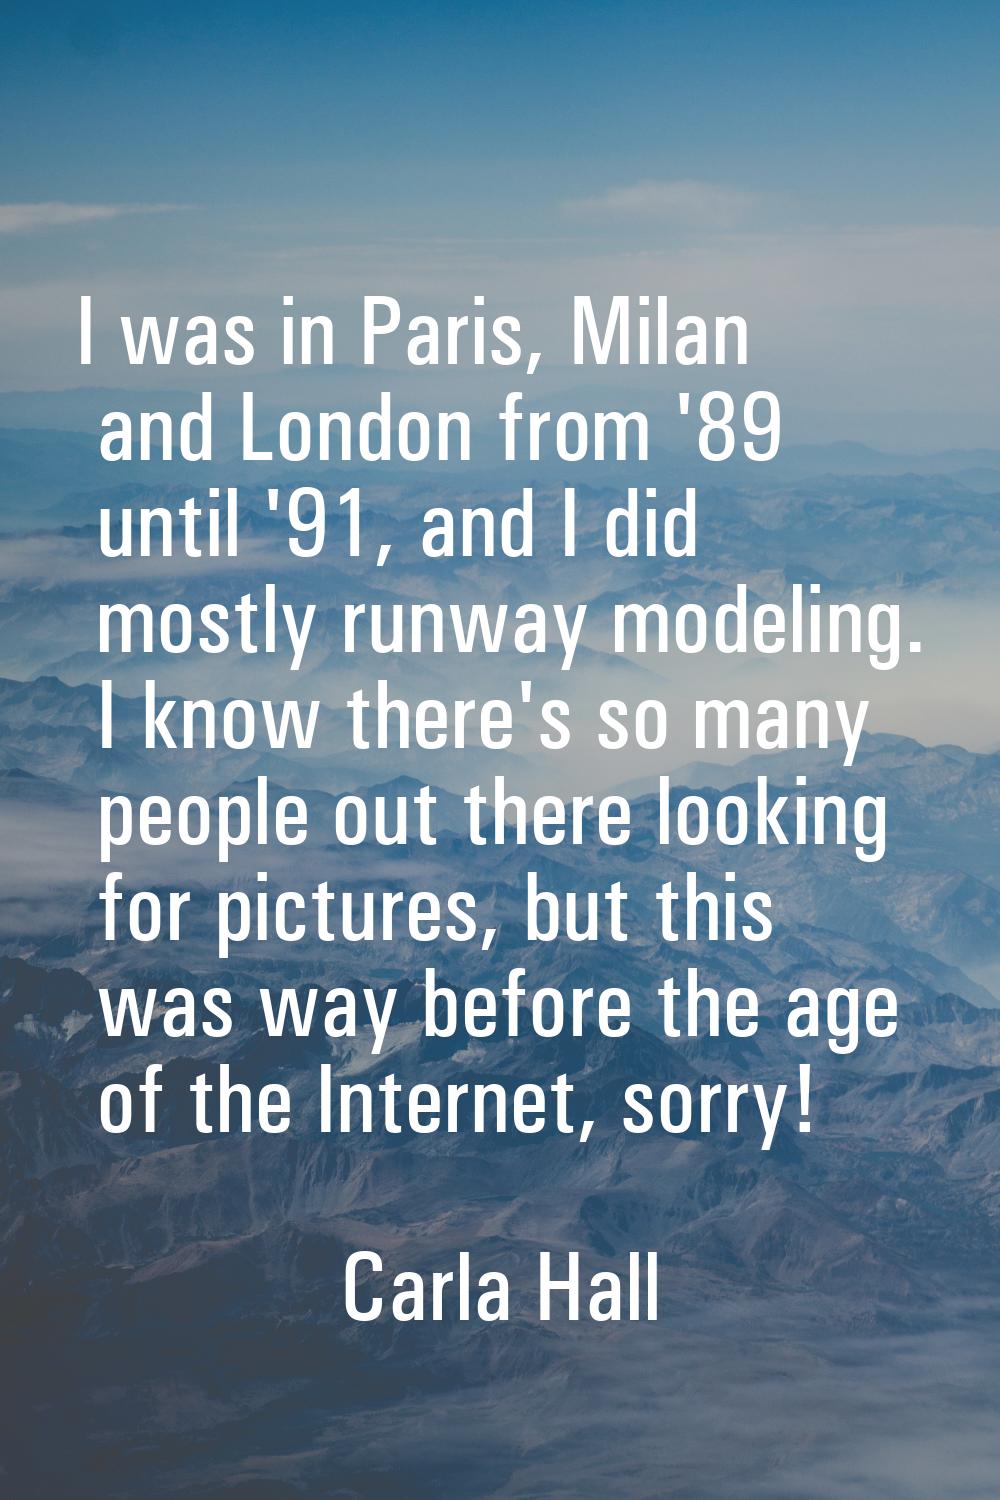 I was in Paris, Milan and London from '89 until '91, and I did mostly runway modeling. I know there